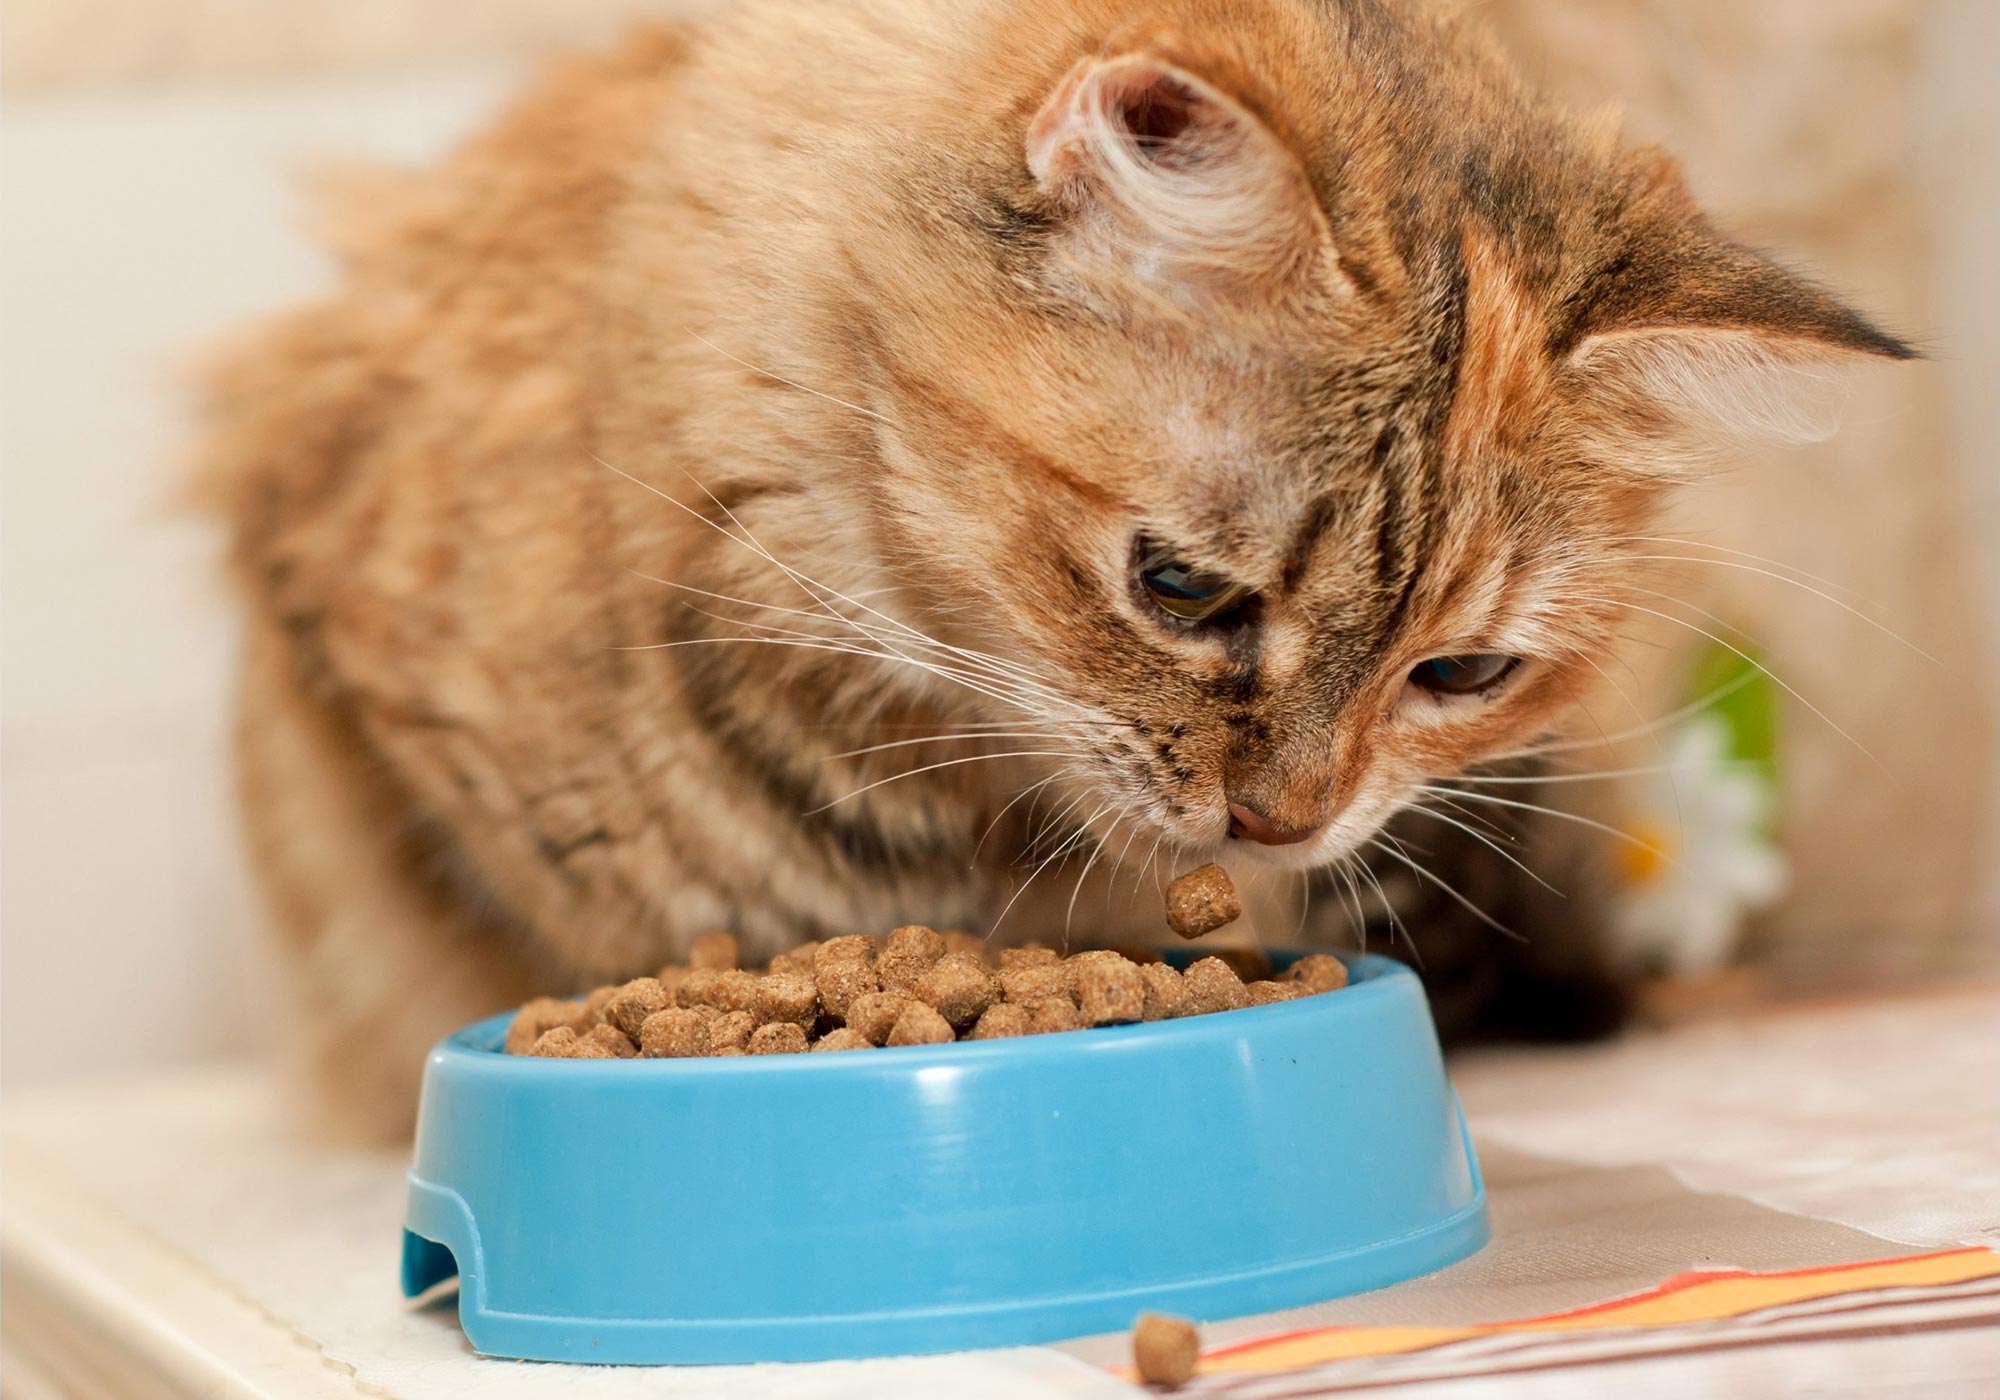 Most Animals Like To Work for Their Food, but Cats Prefer Free Meals